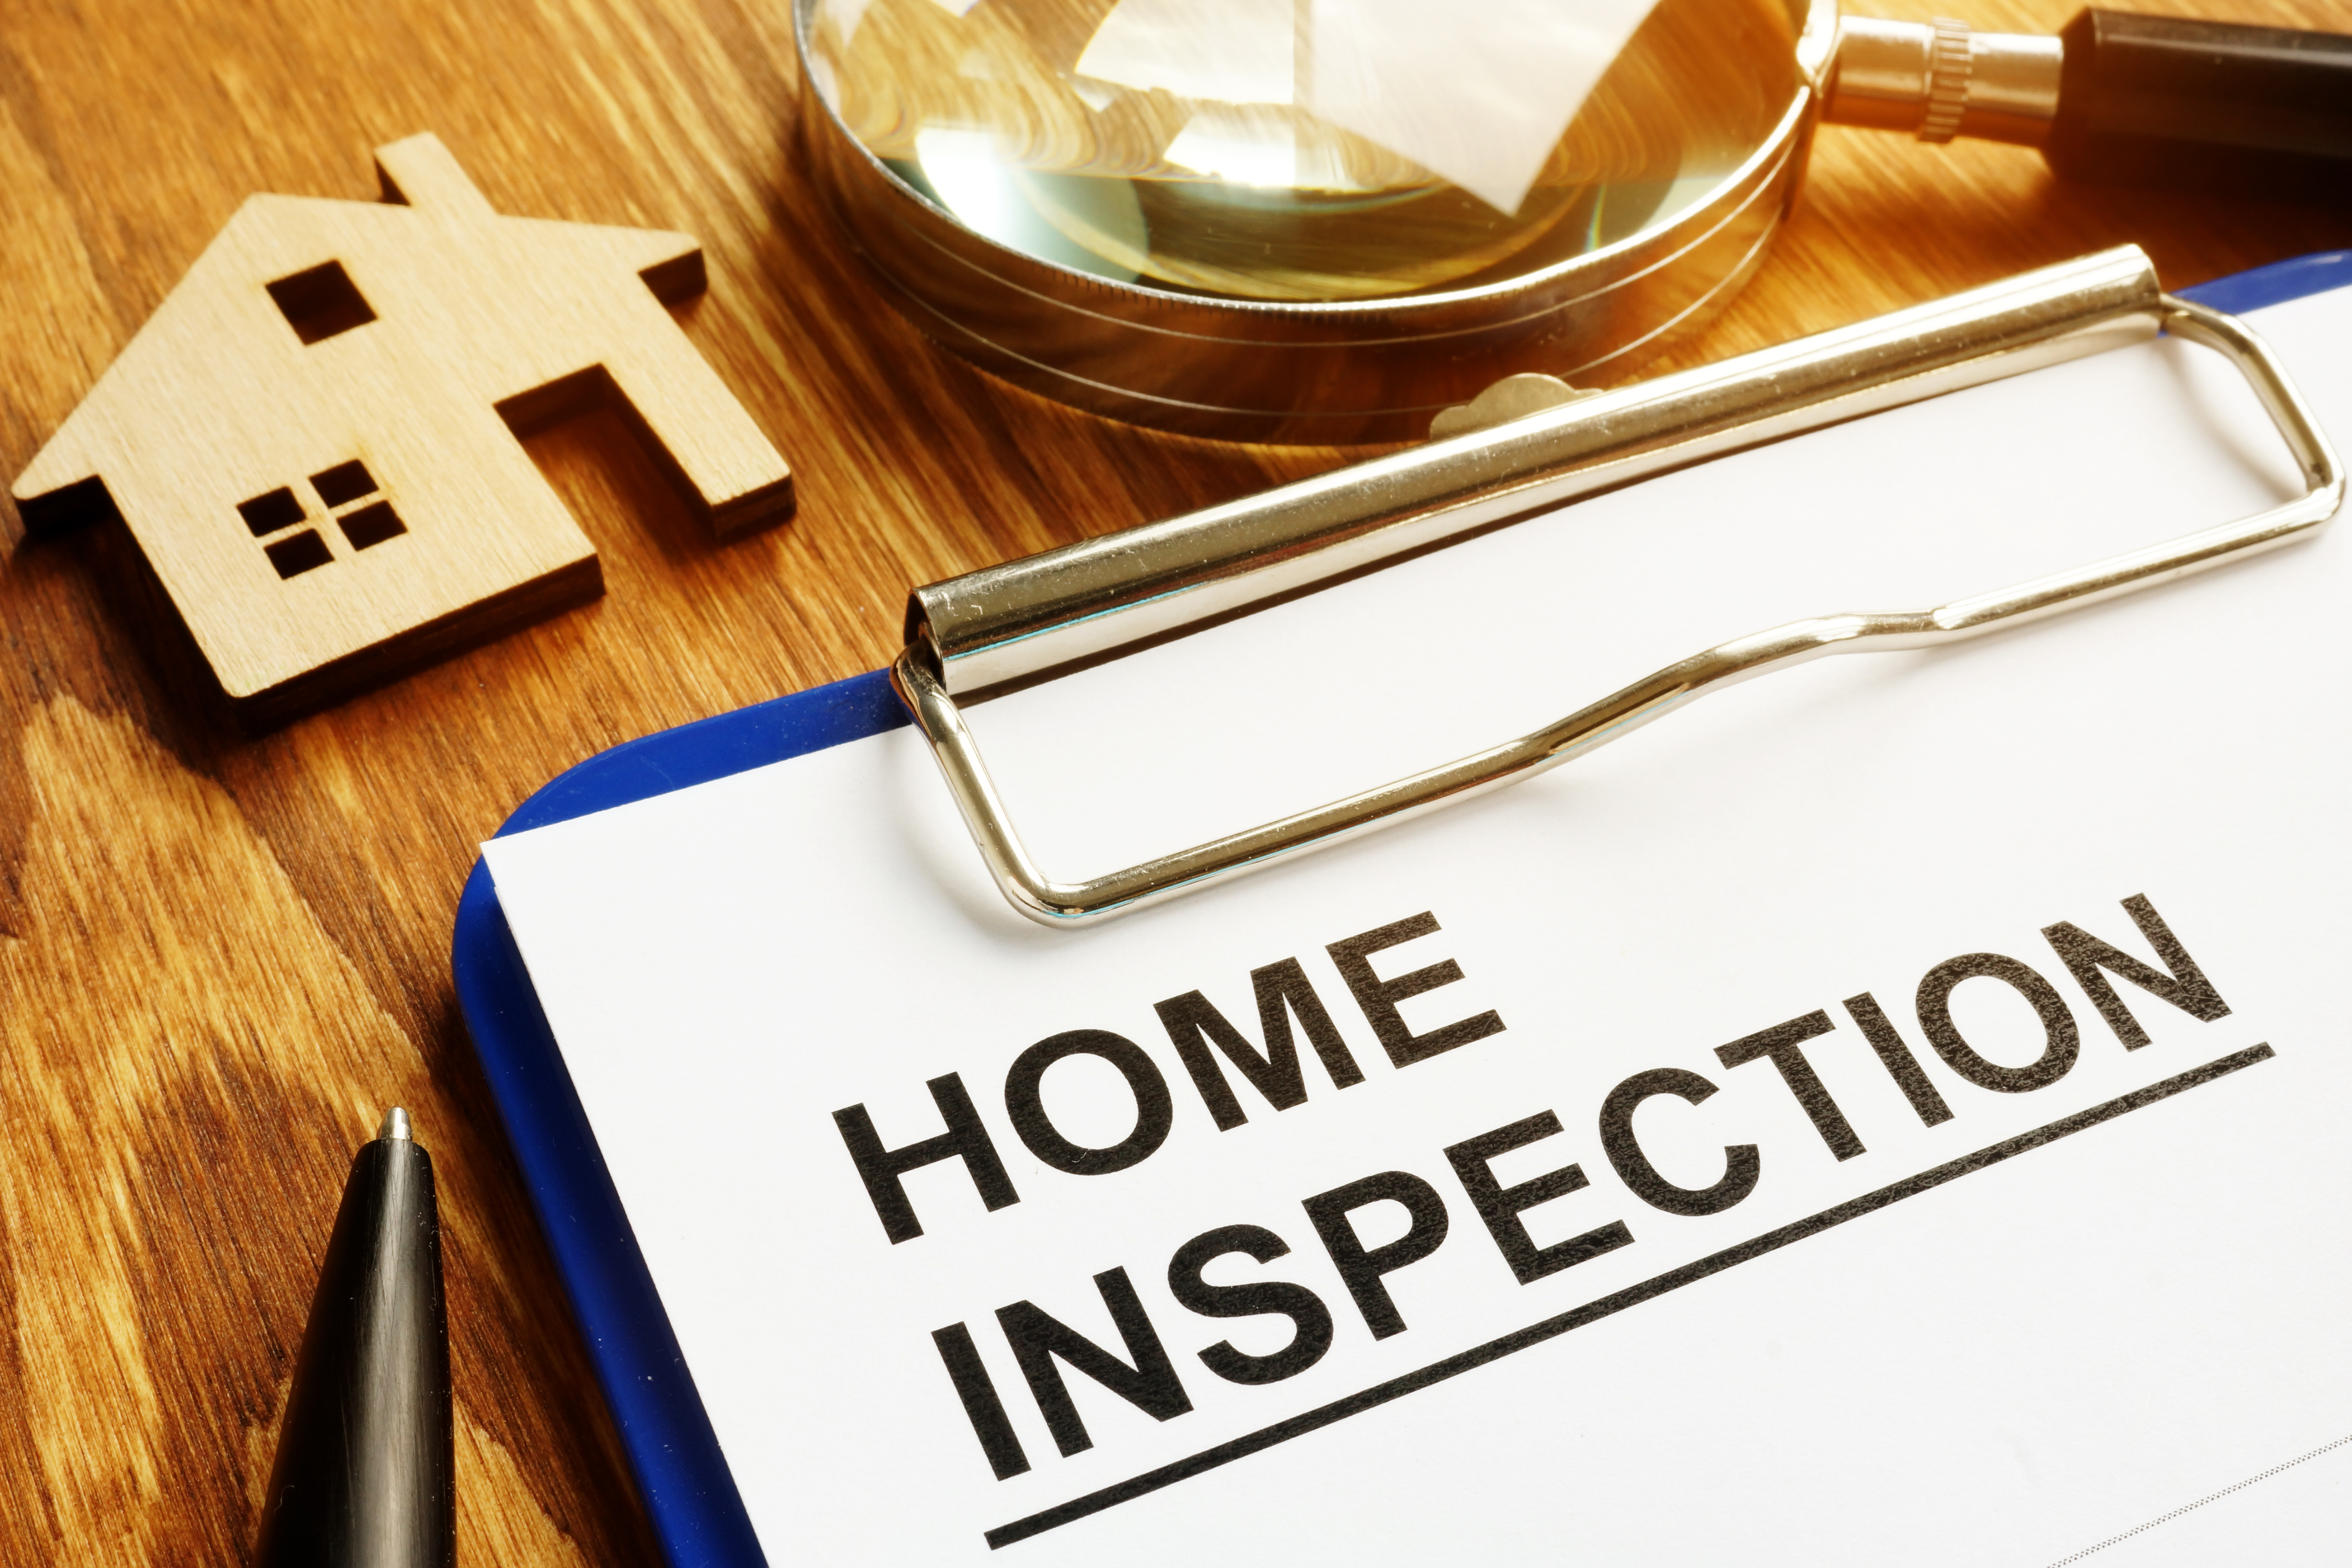 Why a Home Inspection Is Important [INFOGRAPHIC]